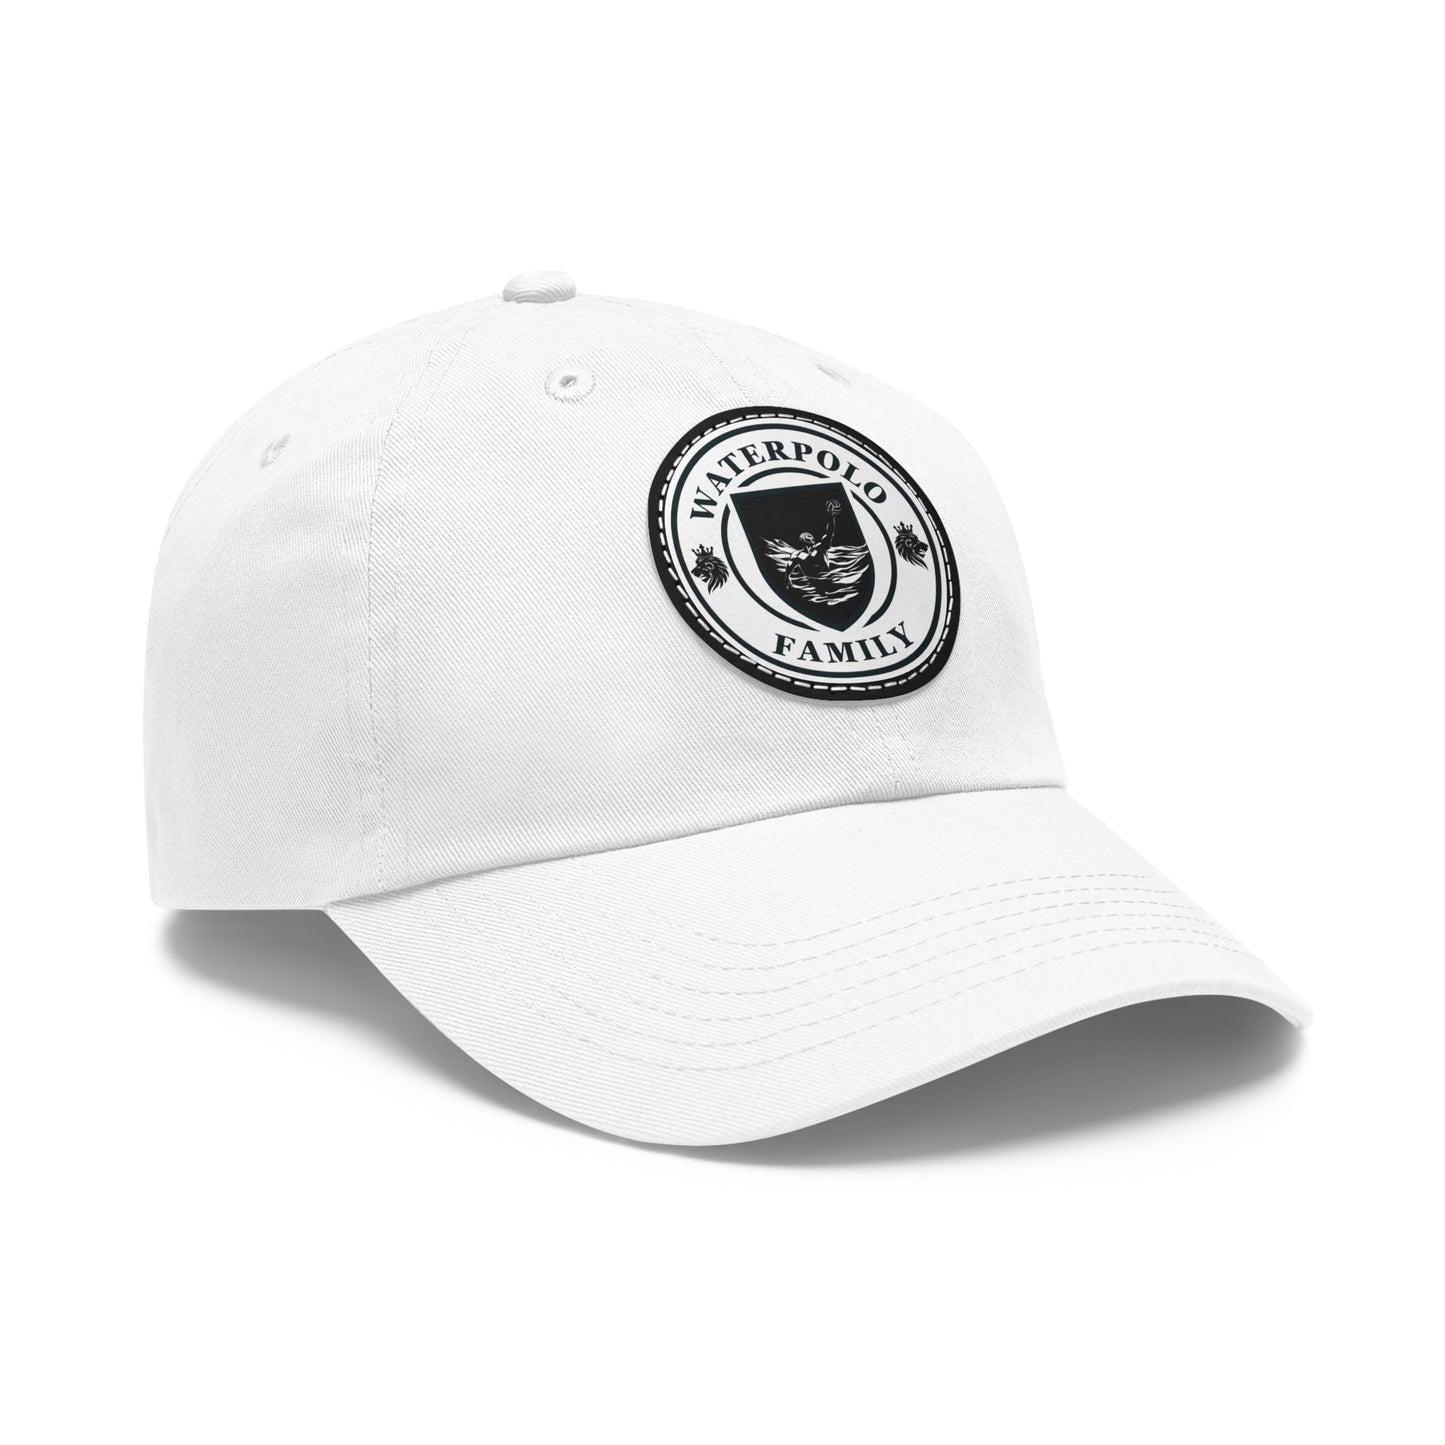 Hat with Leather Patch-Waterpolo